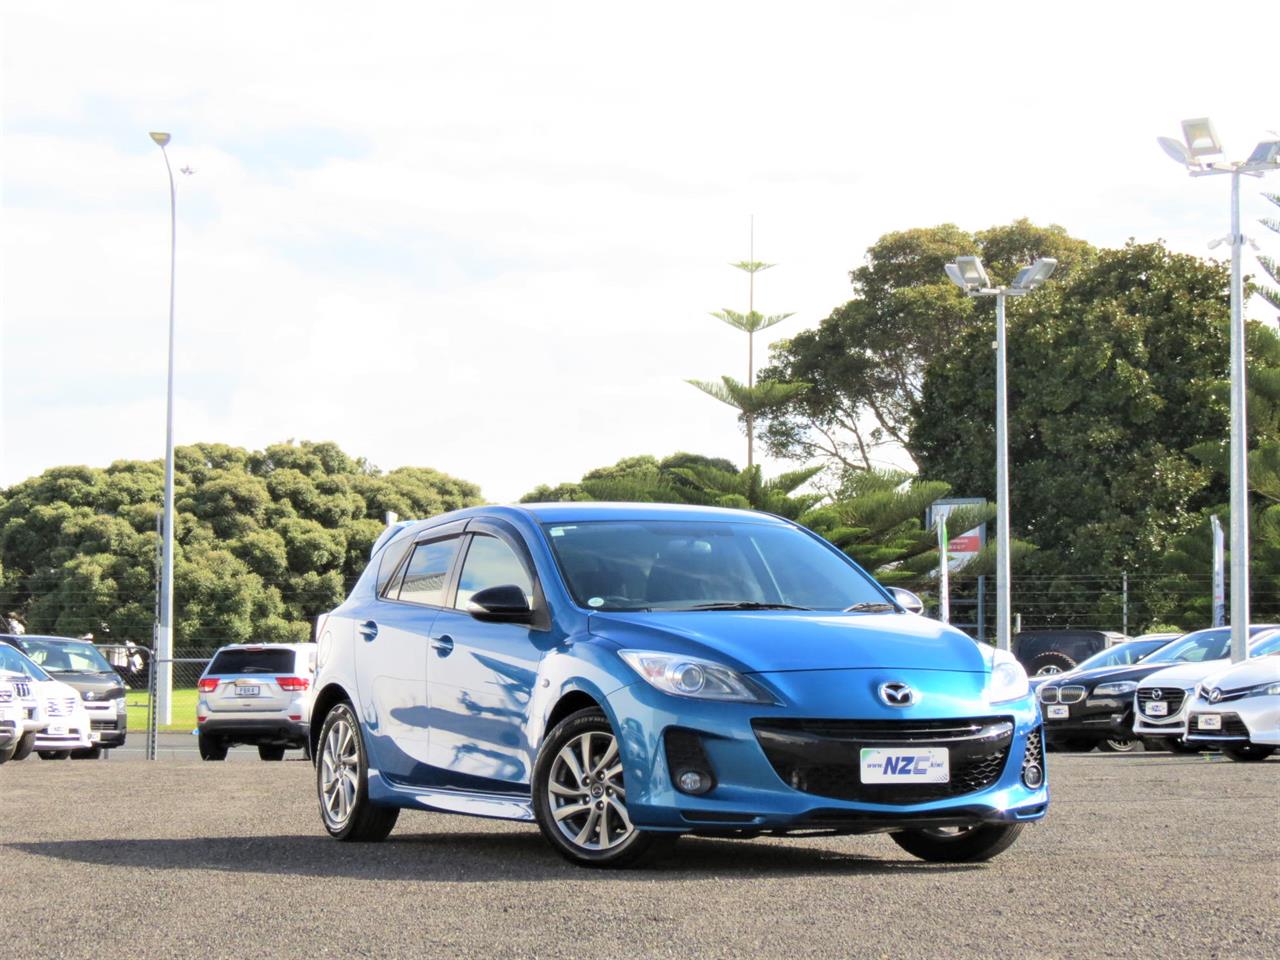 NZC 2013 Mazda Axela just arrived to Auckland